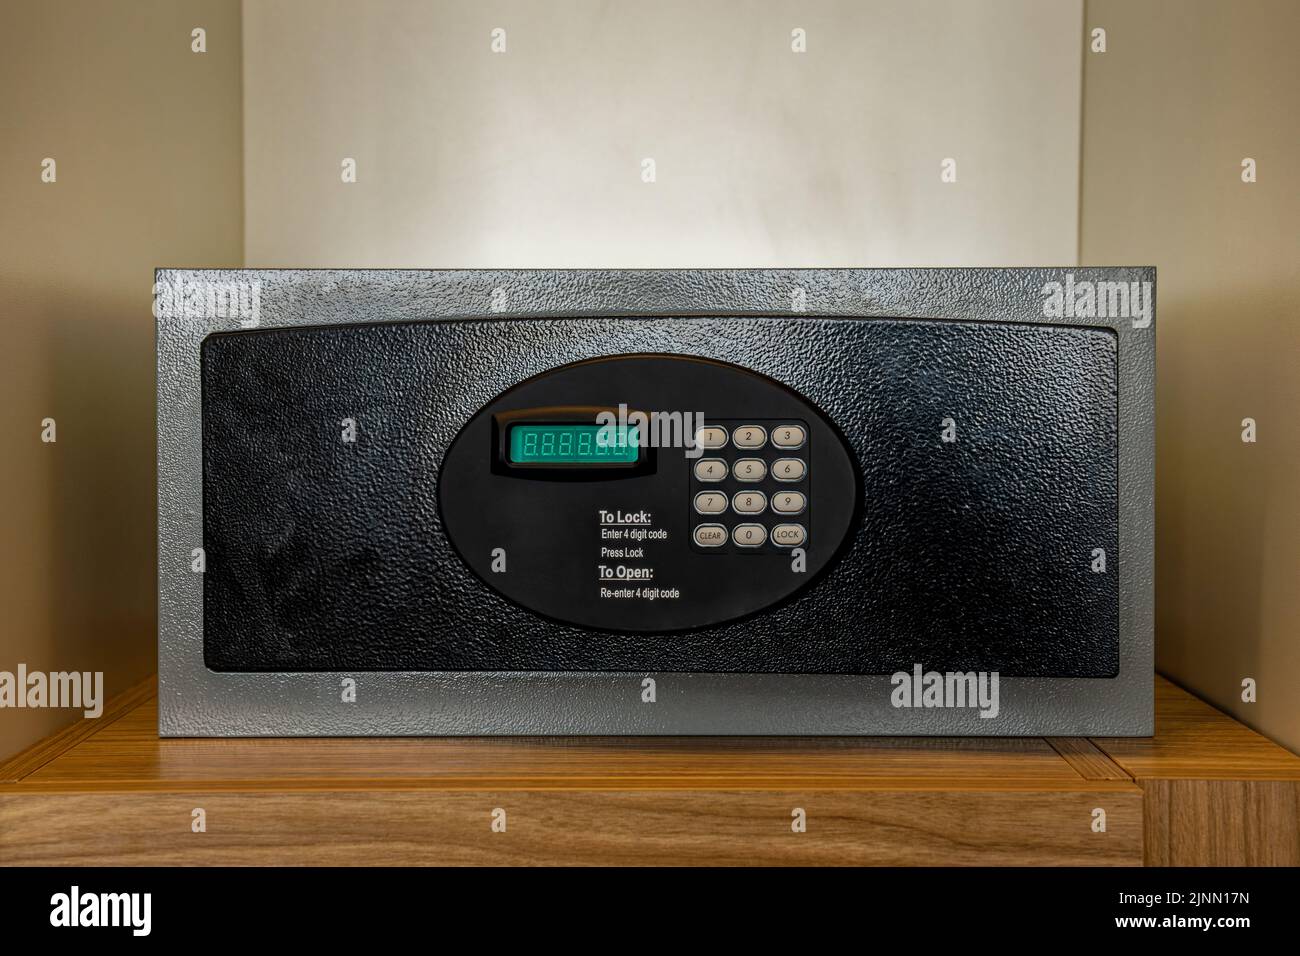 front loading in-room hotel safe with electronic lock located inside a closet.has a keypad and seven-segment LED display Stock Photo